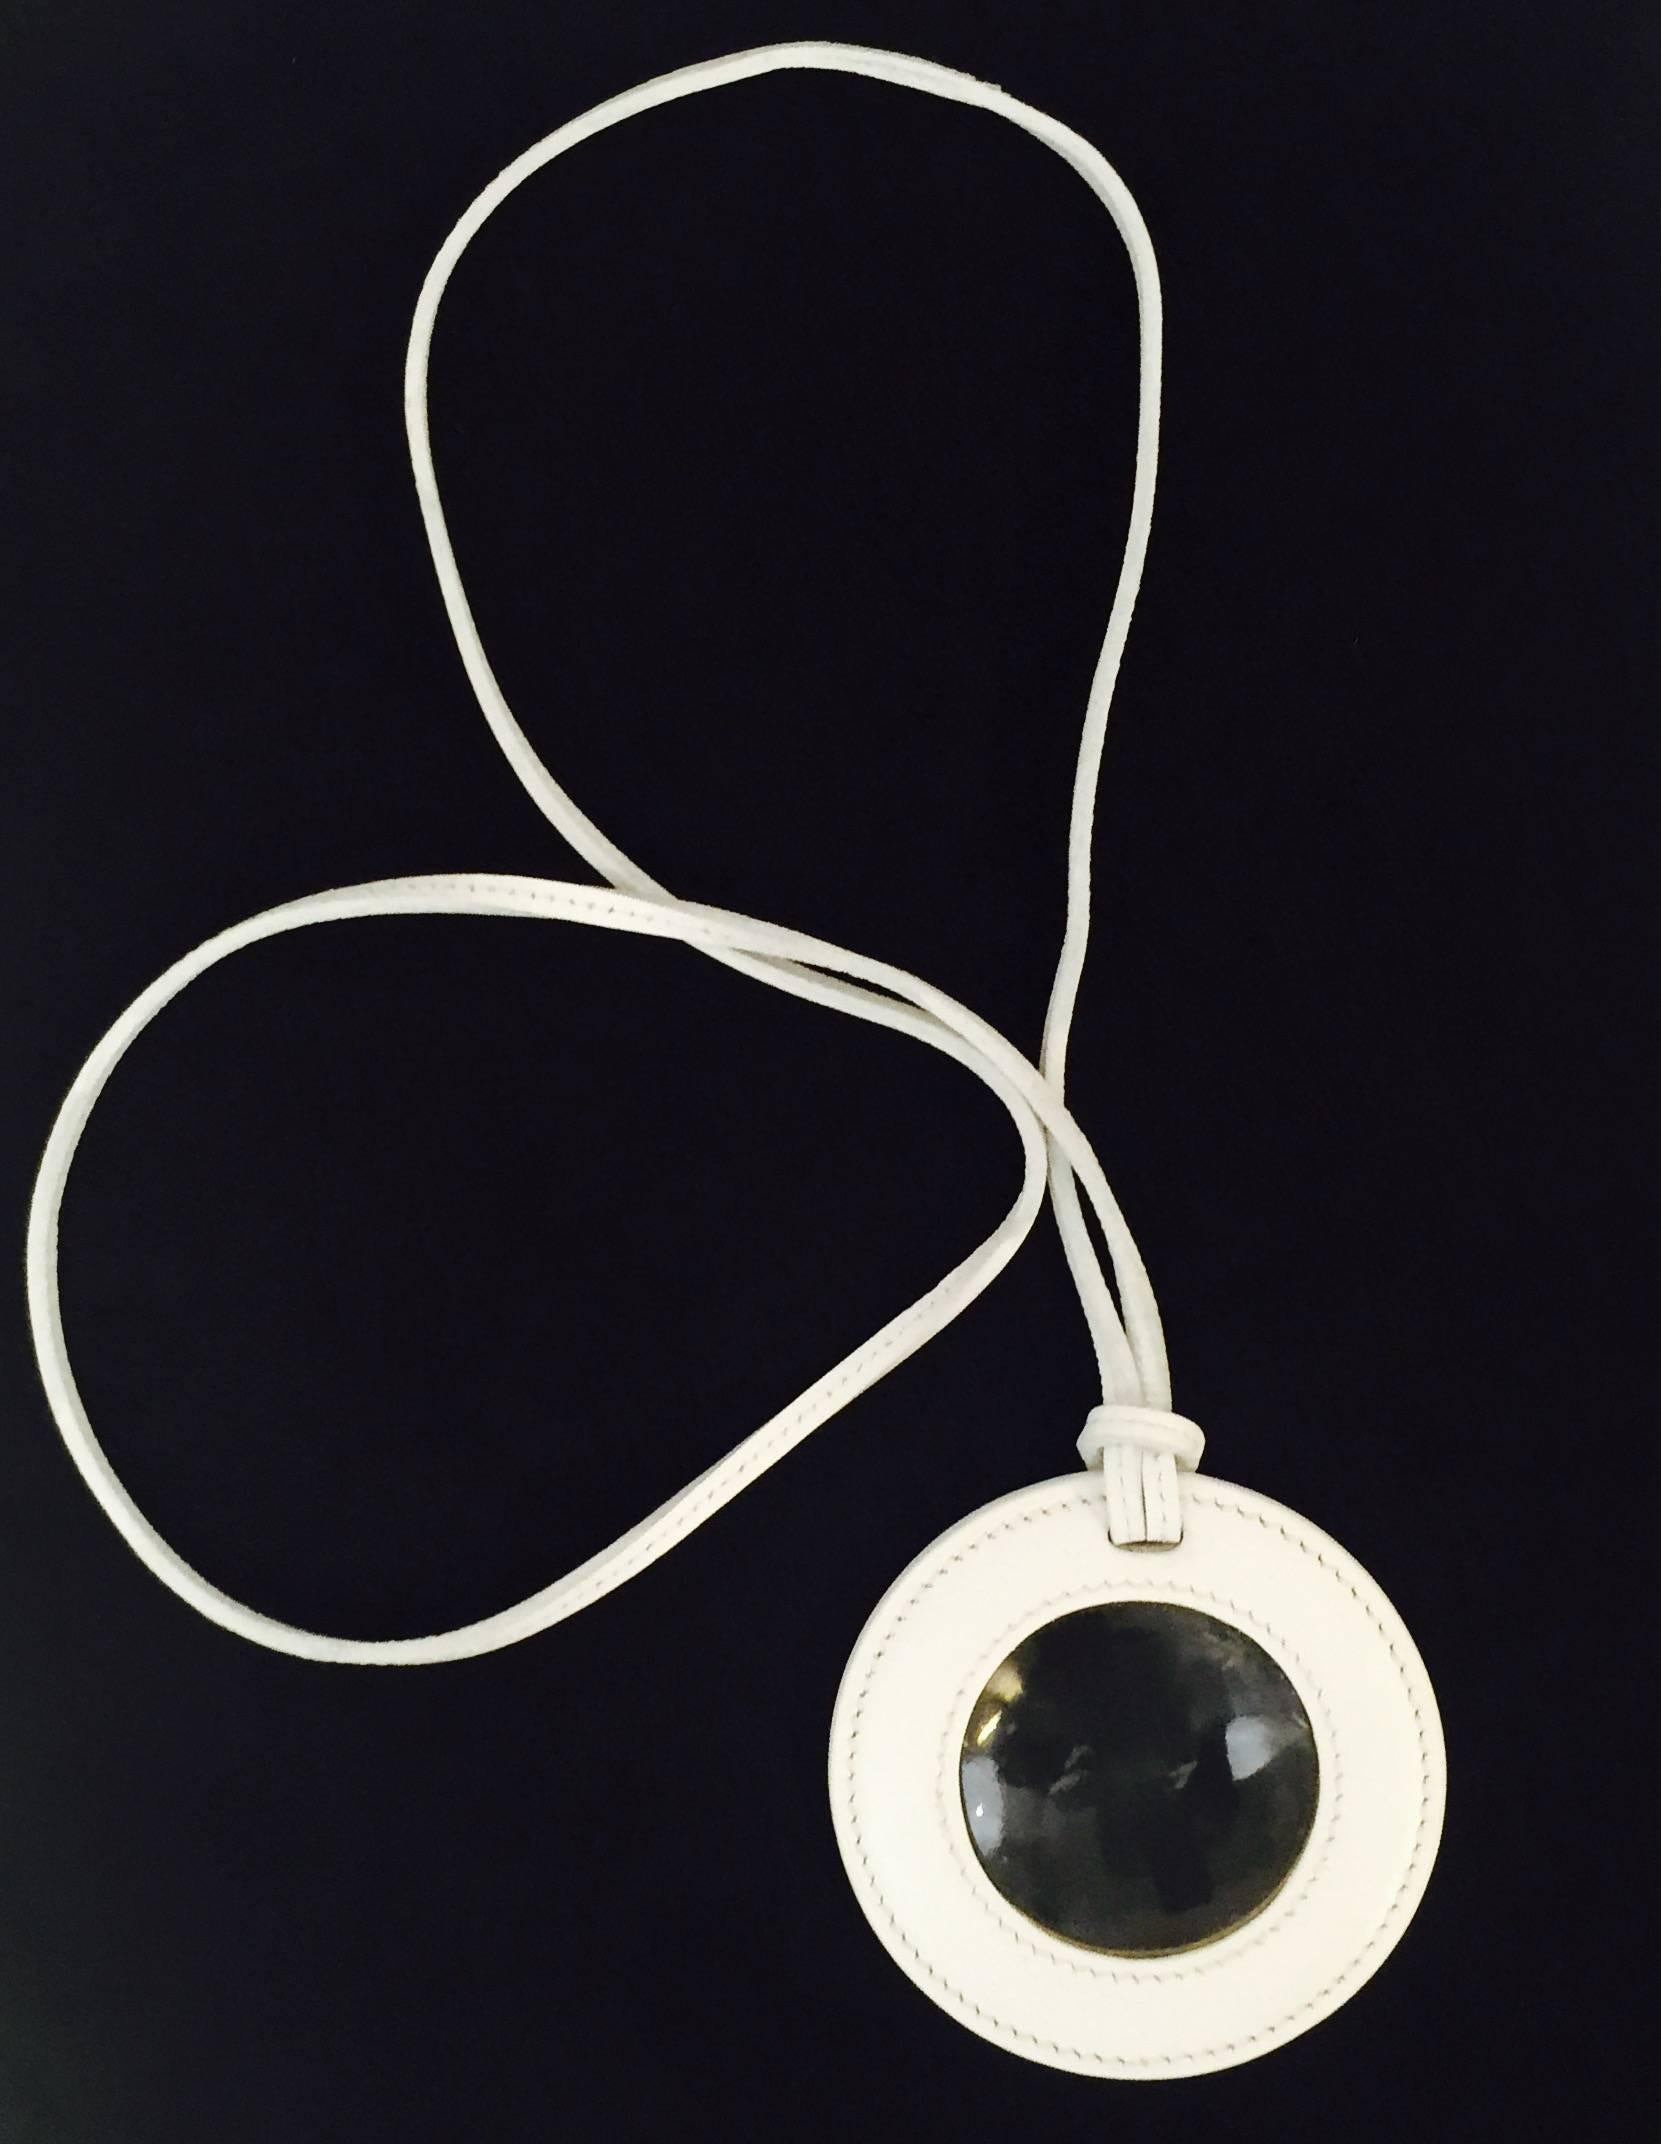 Round Magnifying Loupe is a must for aficionados of all things Hermes!  Features undeniably luxurious white leather frame and necklace.  In above excellent condition...glass is actually still sealed!  Made in France.  Desired everywhere!  Original